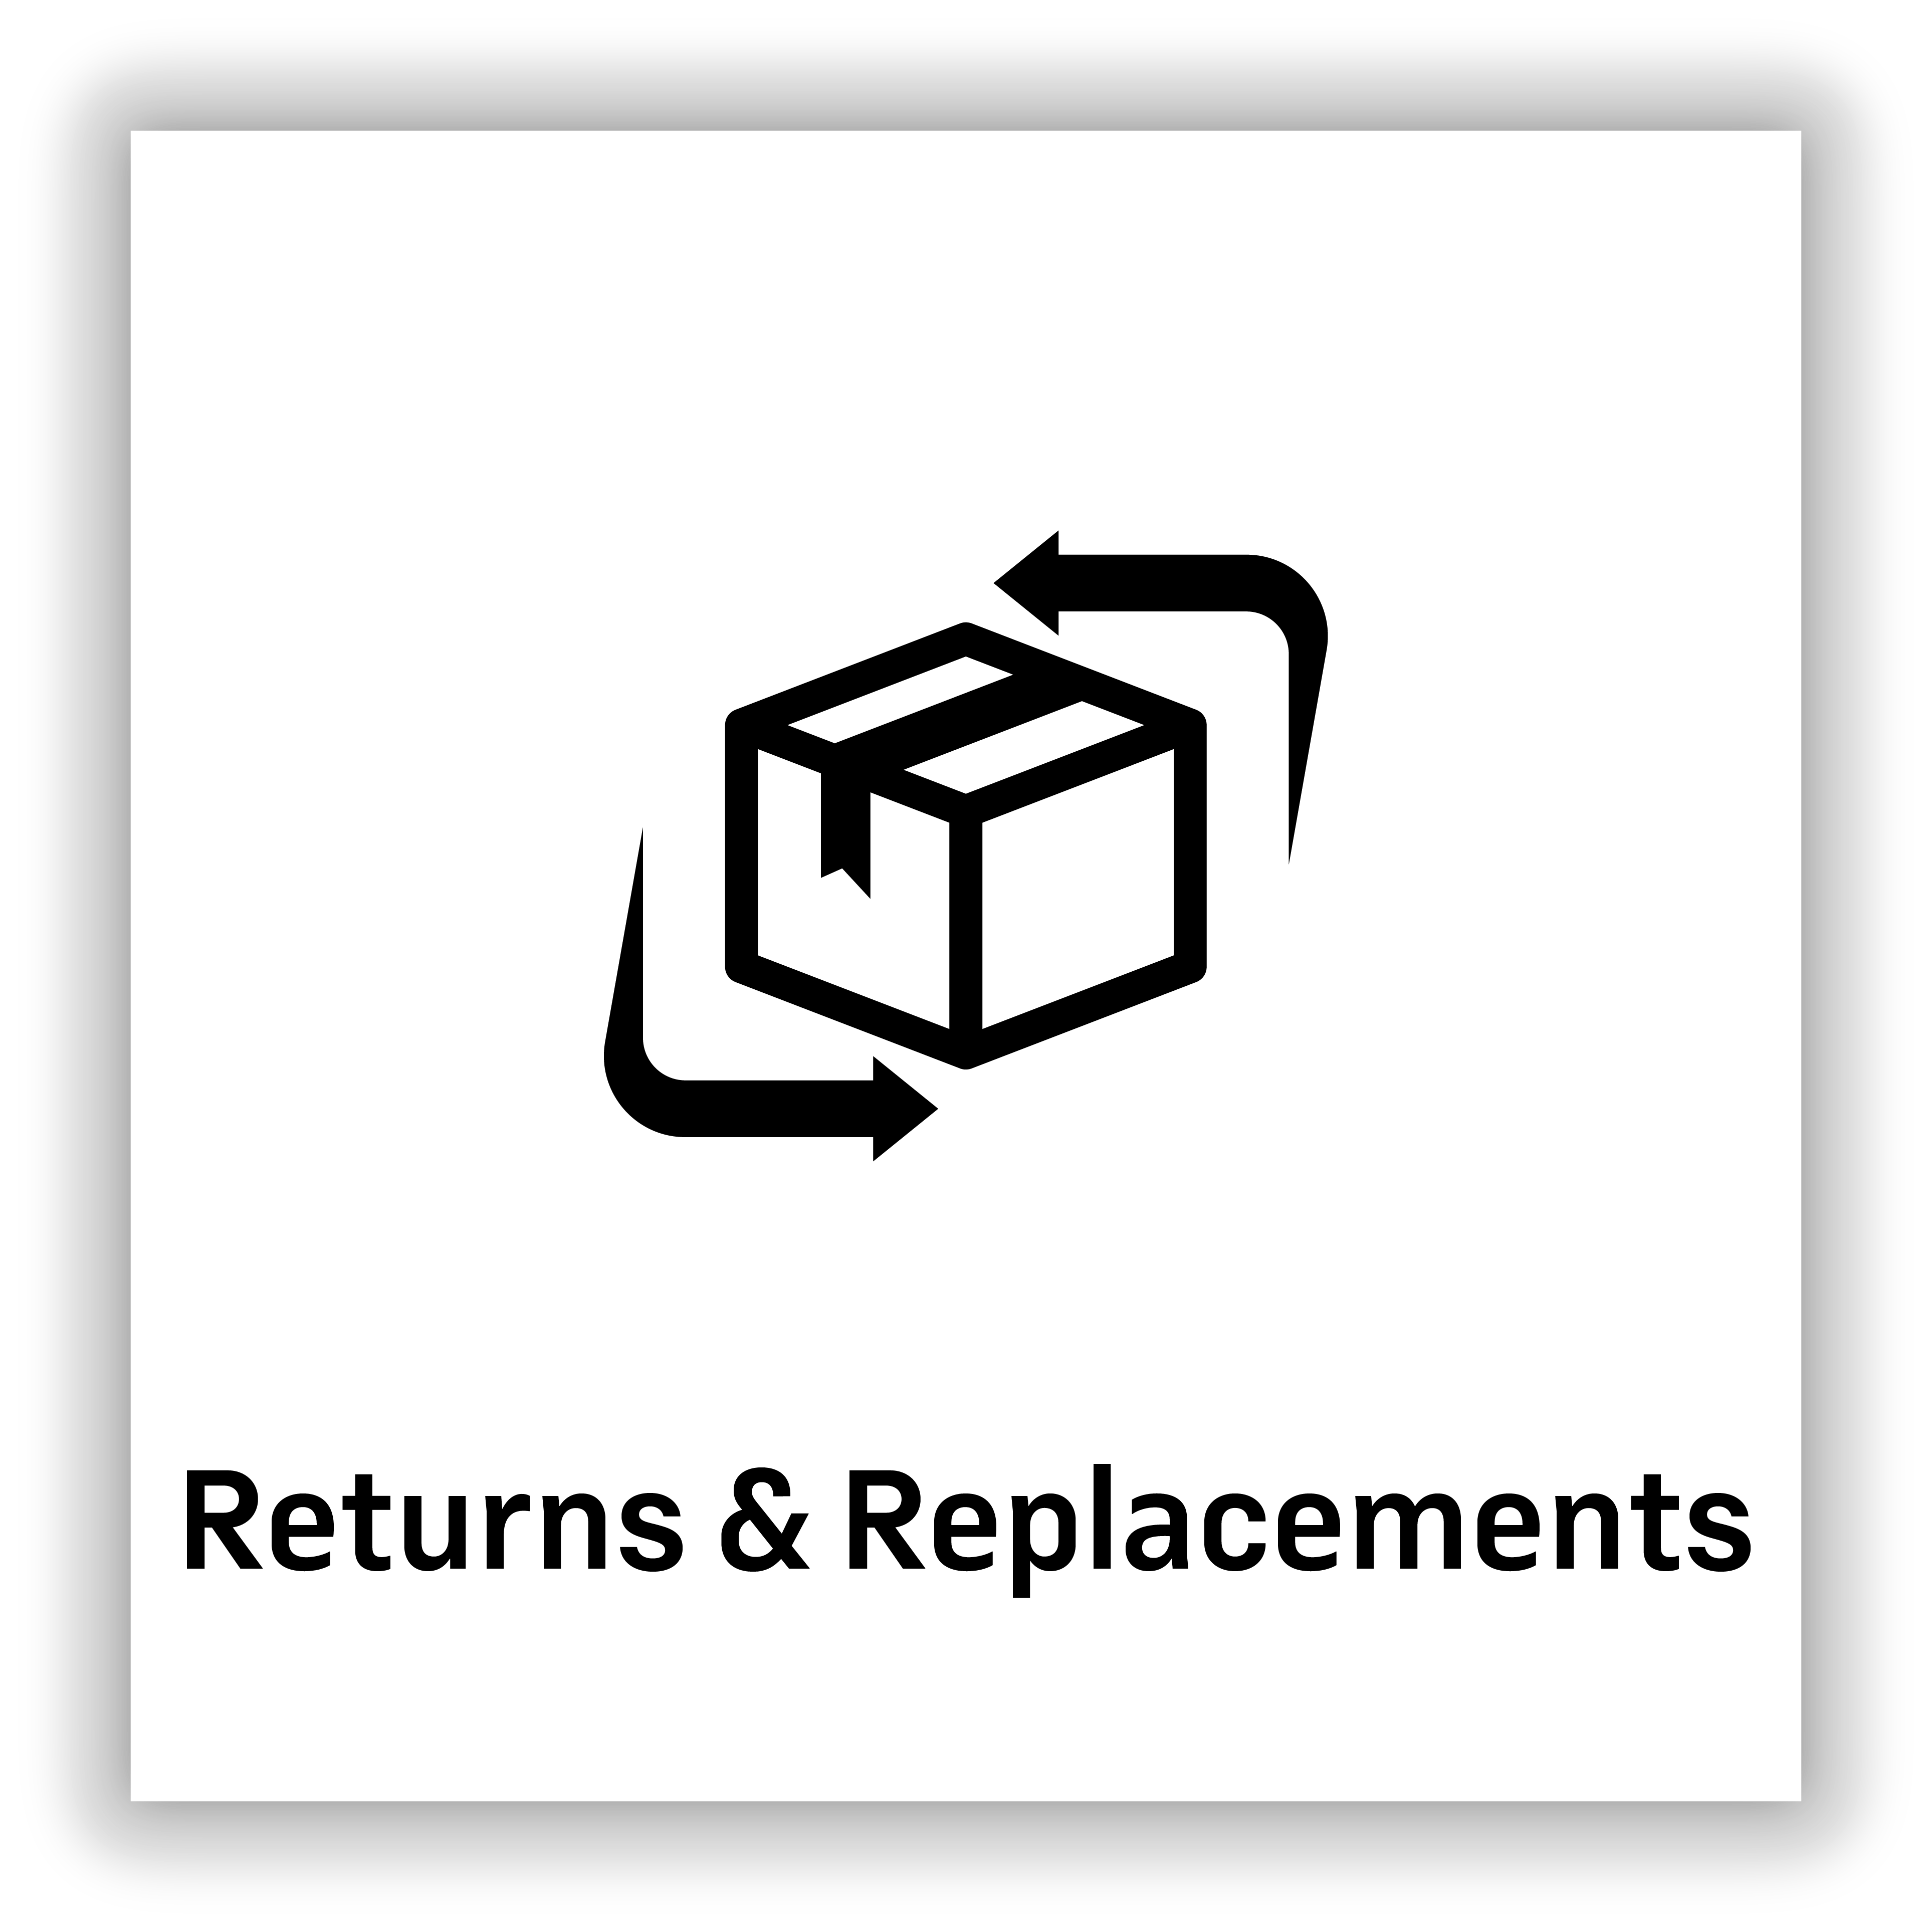 Returns & Replacements